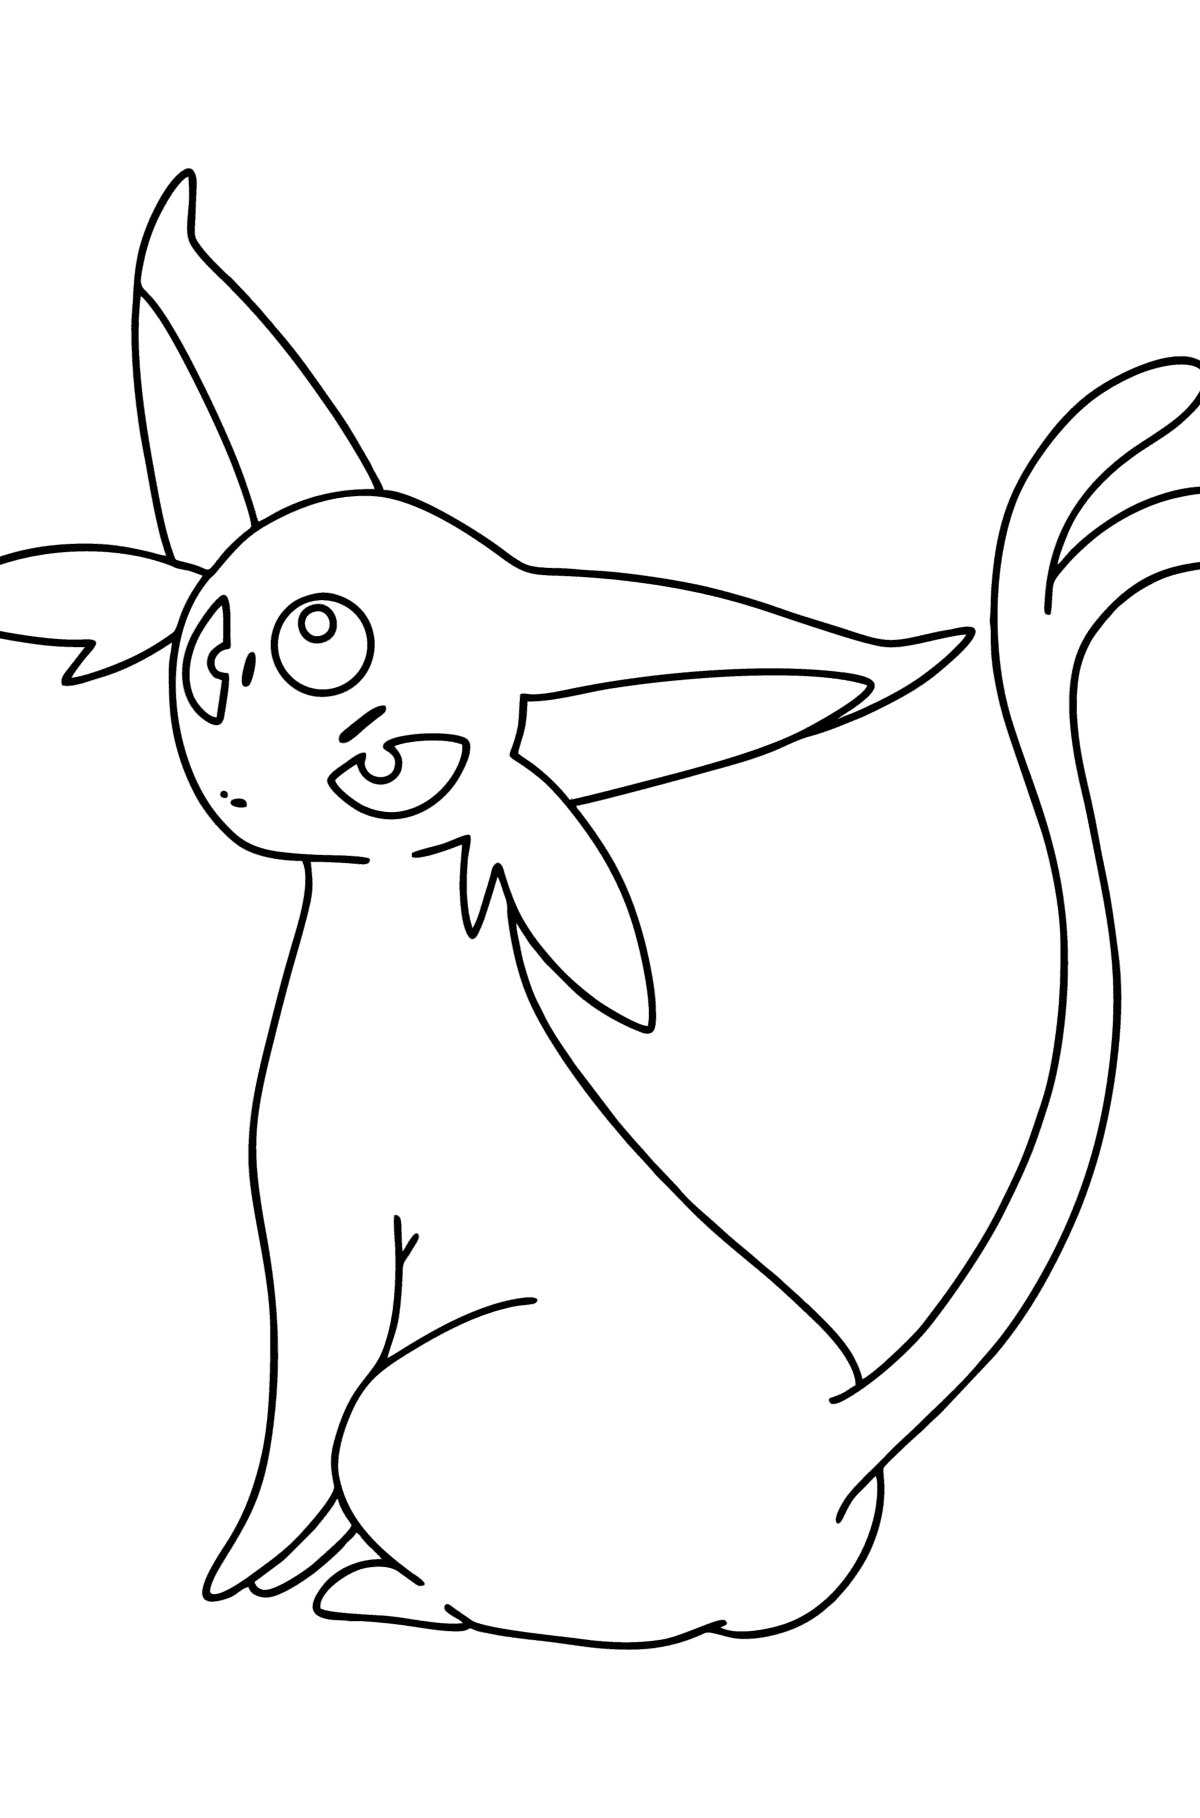 Pokemon Go Espeon coloring page - Coloring Pages for Kids